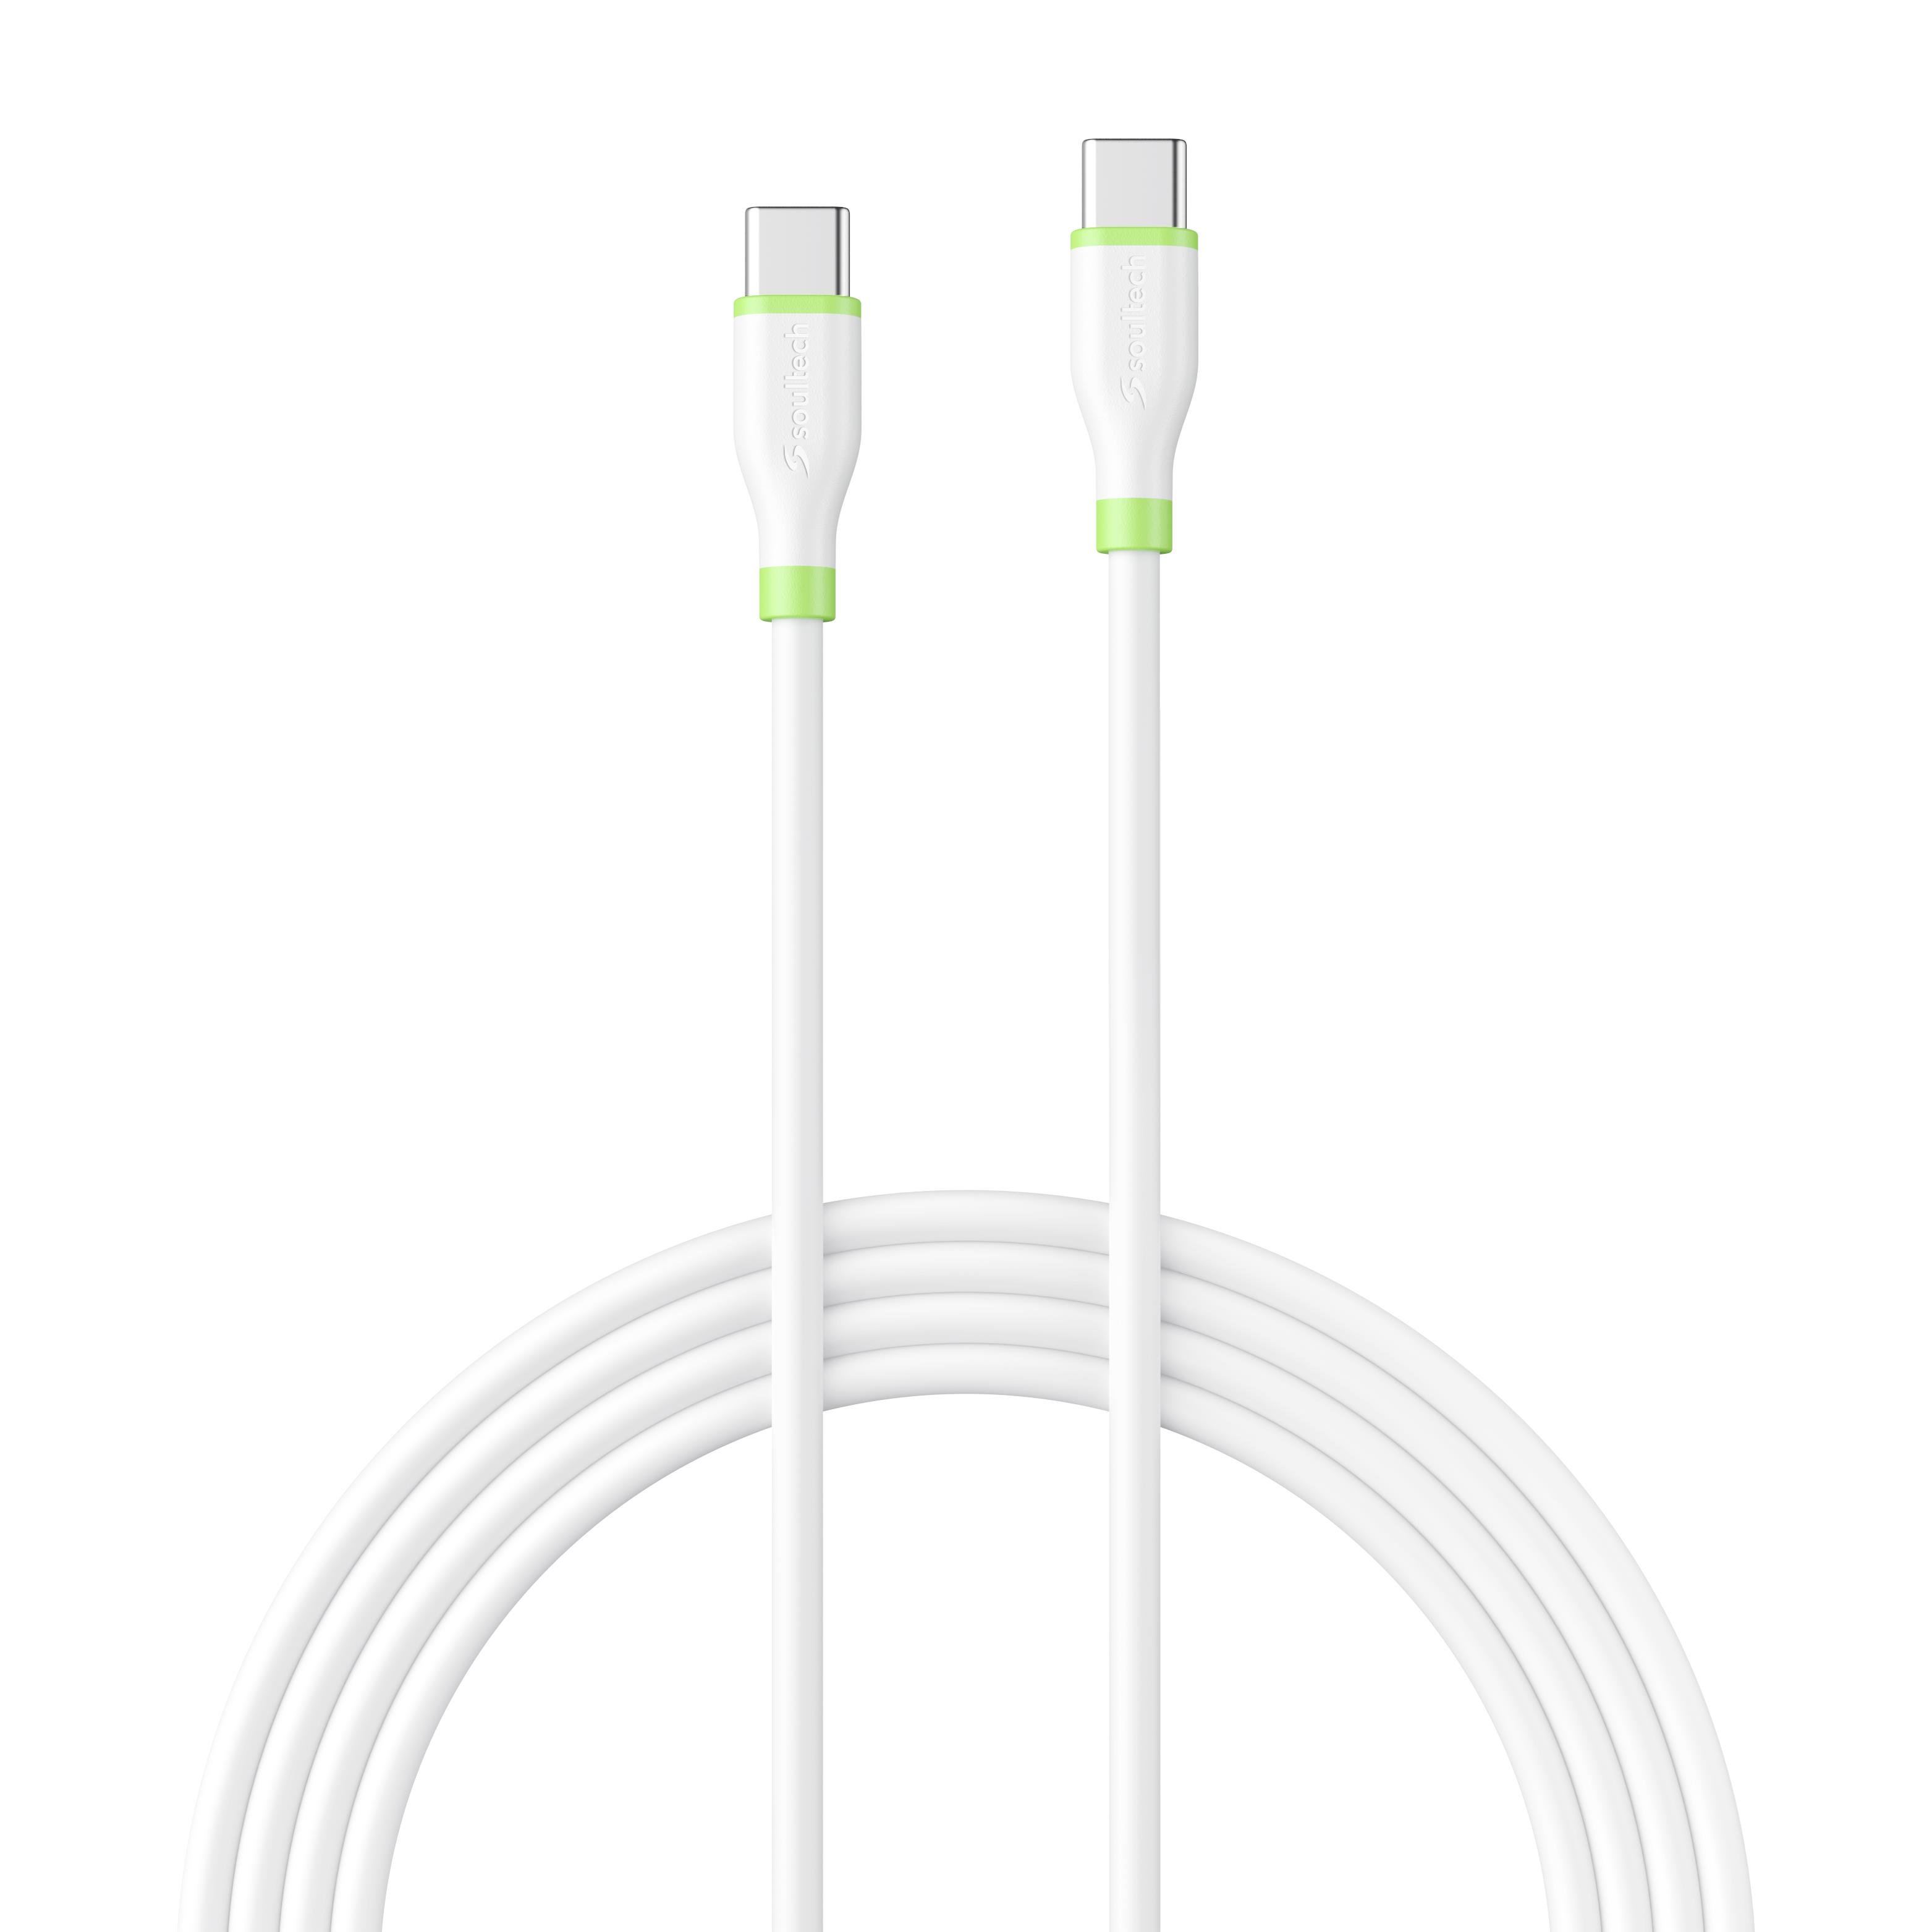 Soultech DK071B Type-C to Type-C 3A Soft Cable